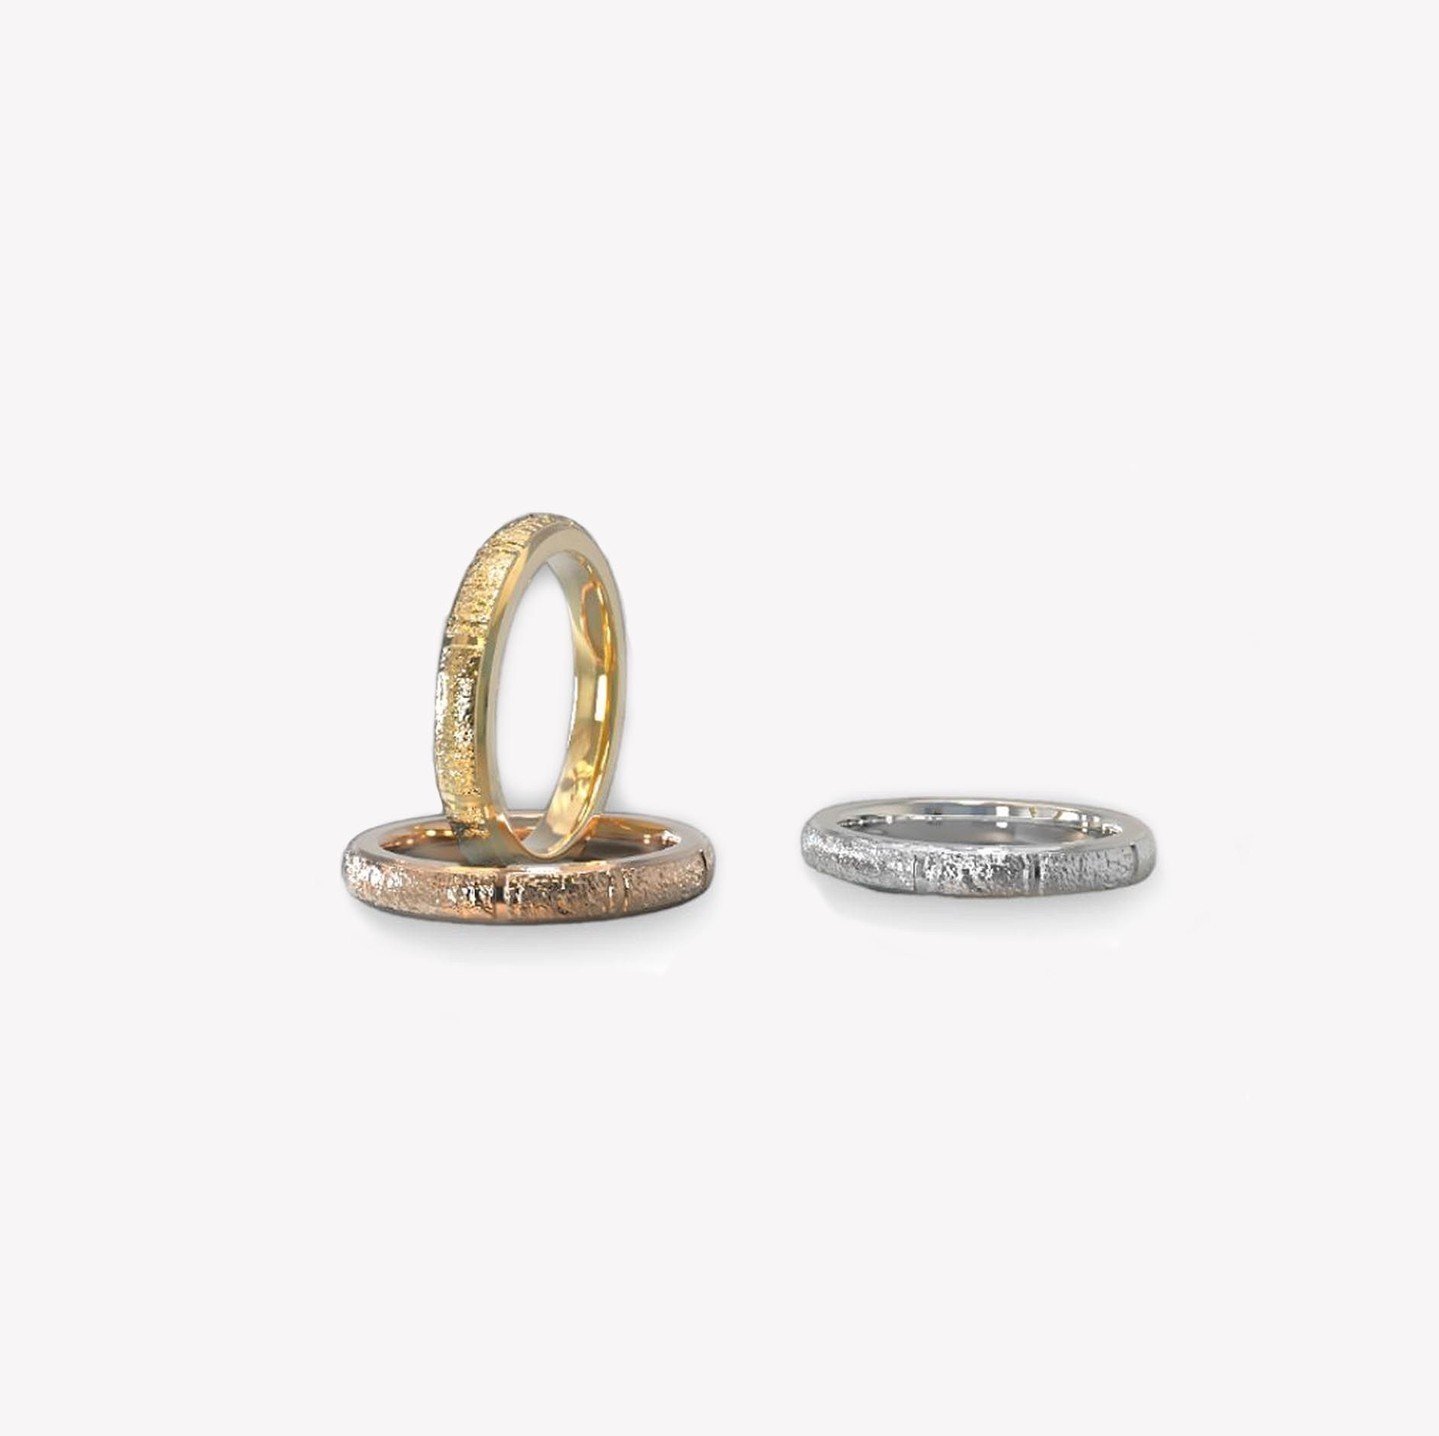 Sandstone Stacking Rings. 💍🧱

From the new Building Bricks Of Life Collection and inspired by the stonework at our country estate at Wyresdale Park. 

#stonering #brickrings #stackingrings #silversmith #goldsmith #rings